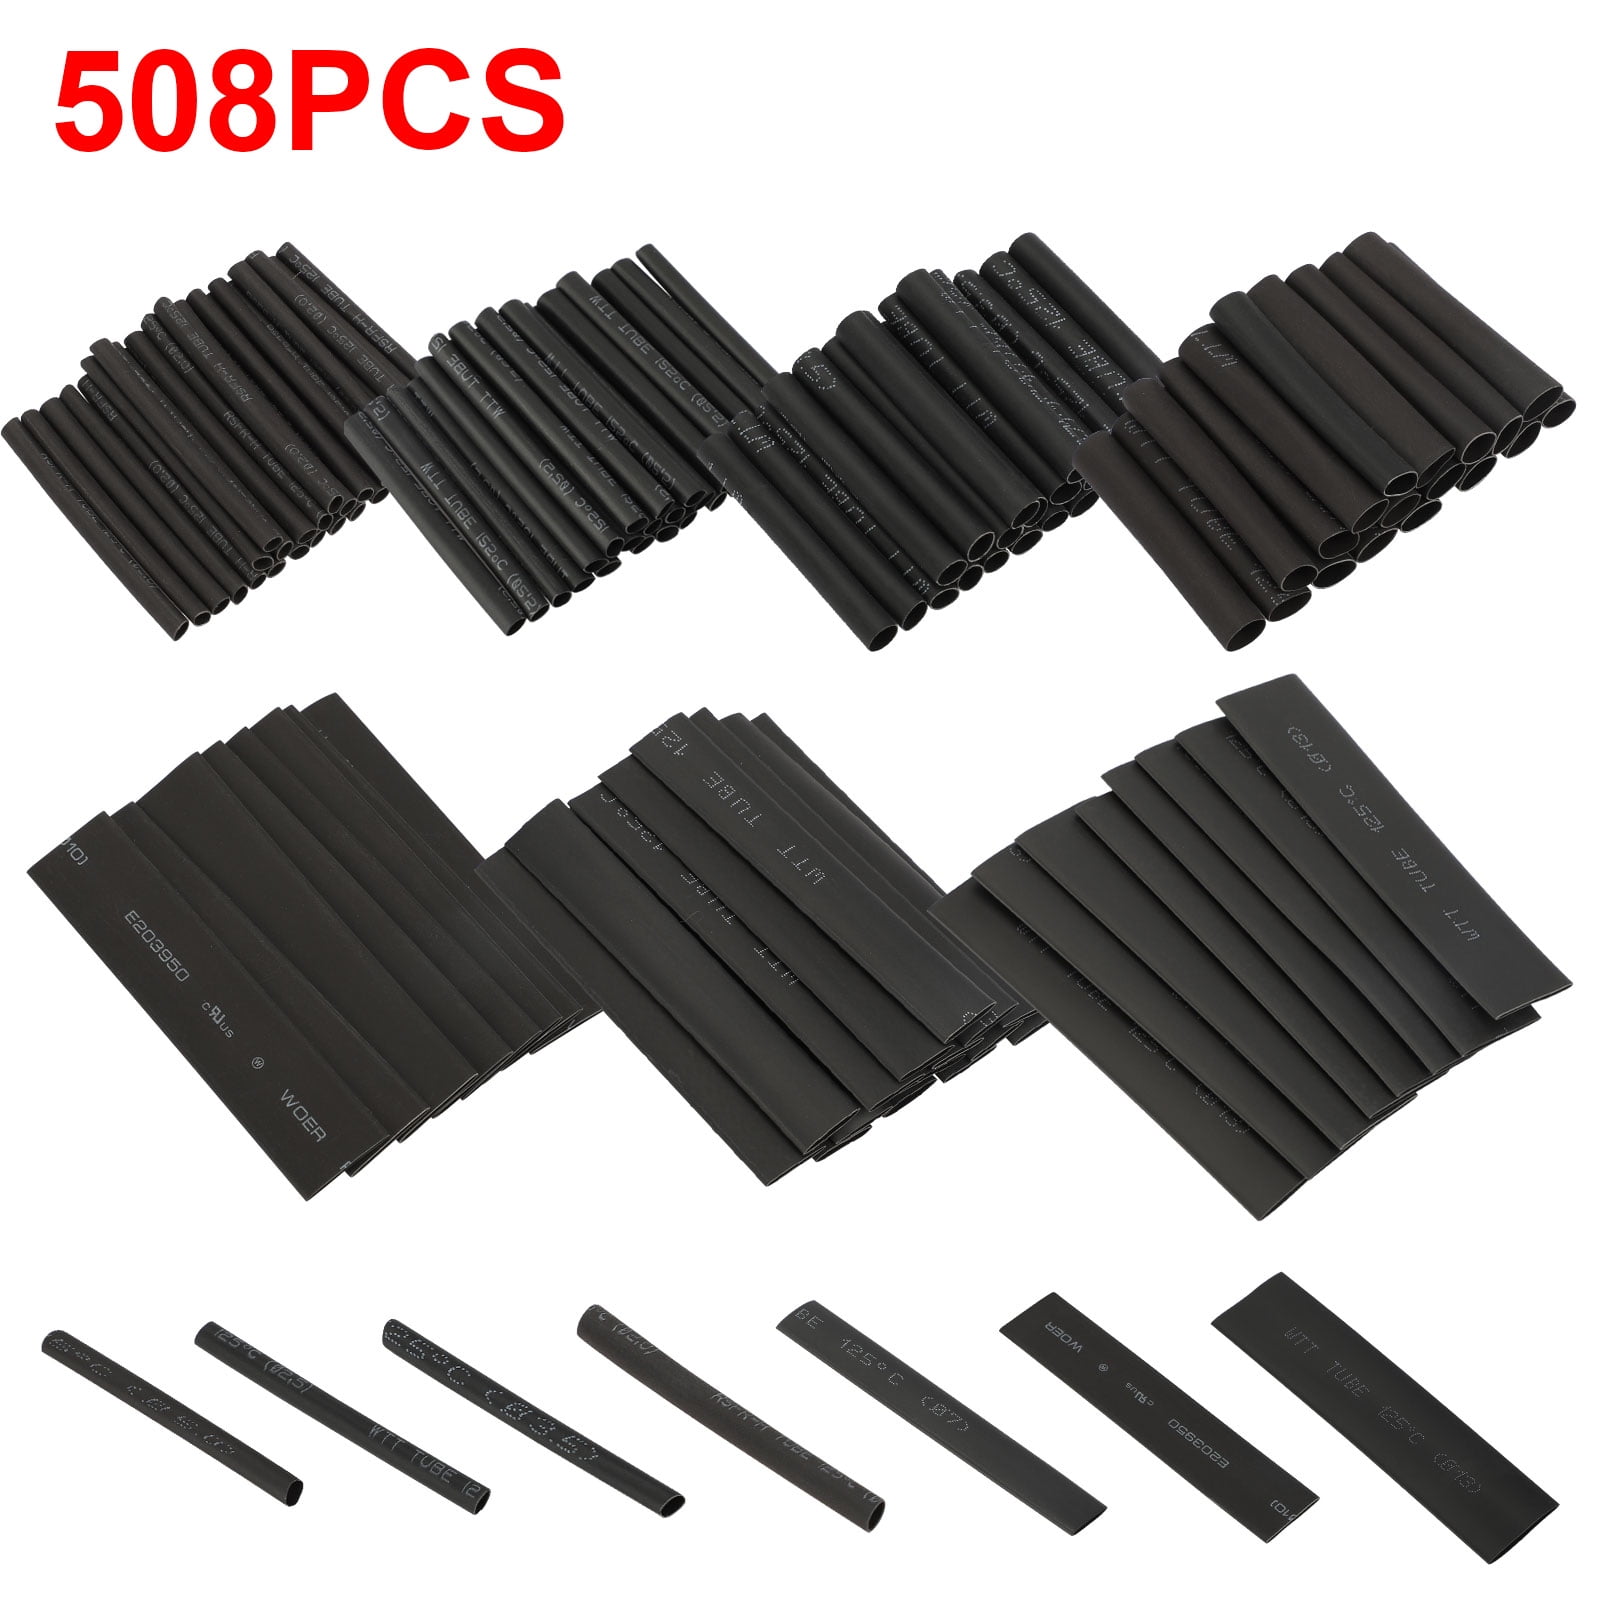 3:1 Heat Shrink Tubing Kit Adhesive Double Wall Assortment White and Black Insulation Waterproof Polyolefin for Electrical Industry Automotive Wire Connector 